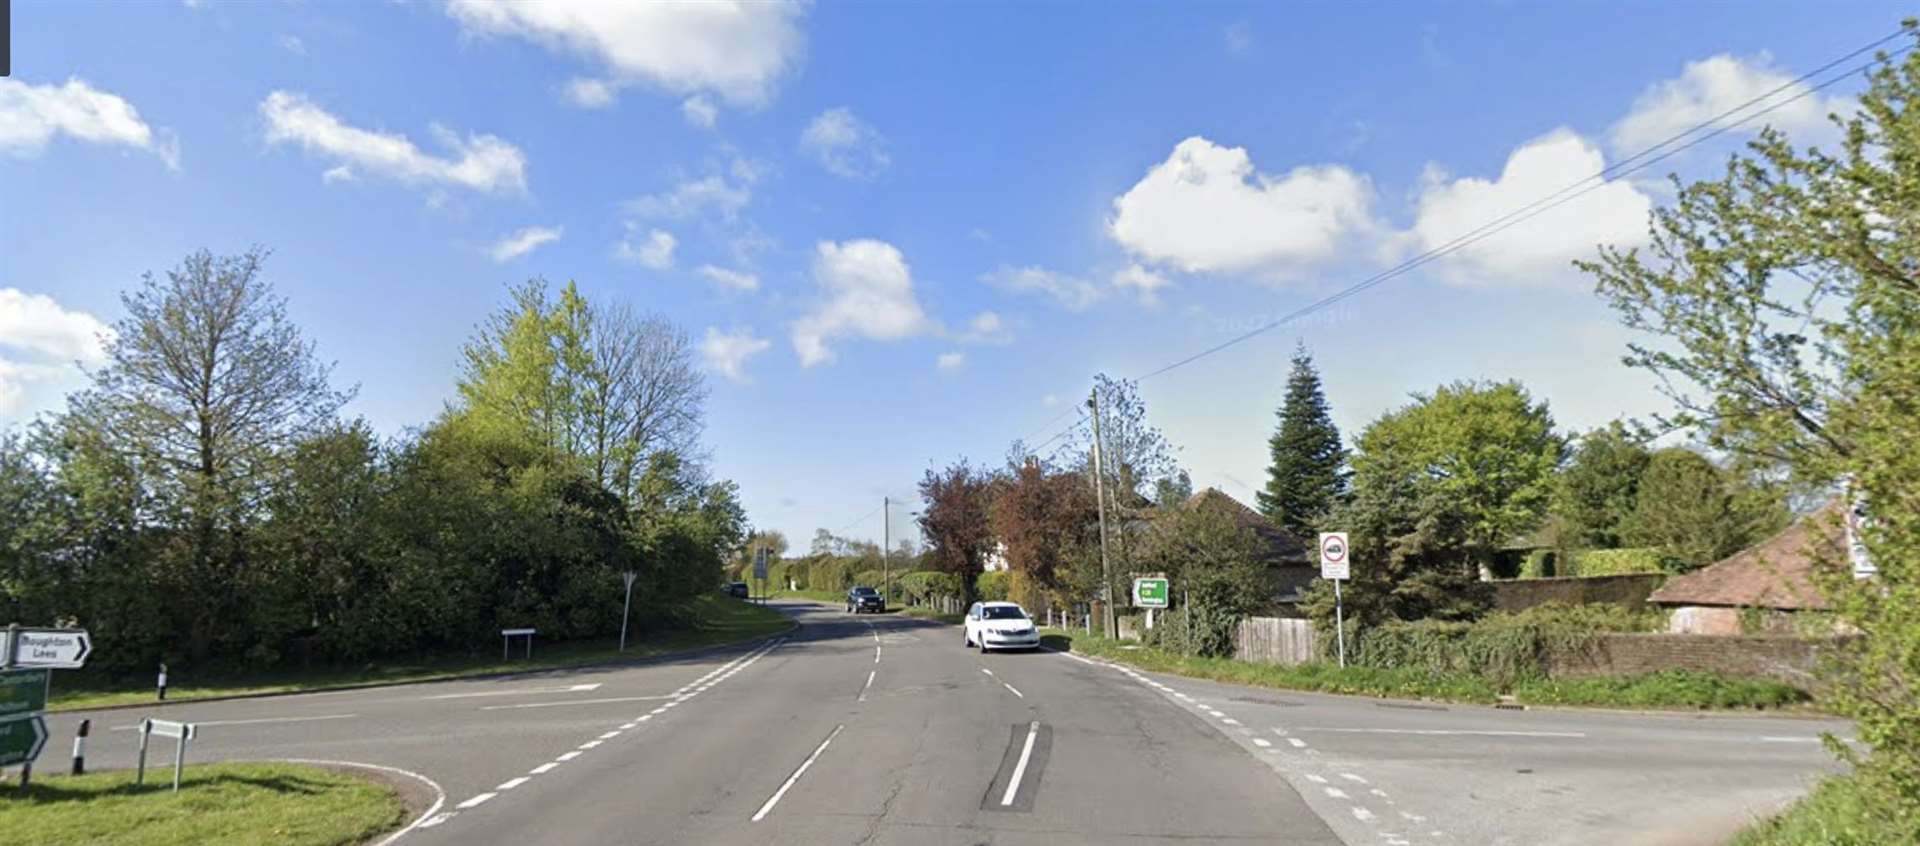 The crash occurred on the A28 Canterbury Road Wye